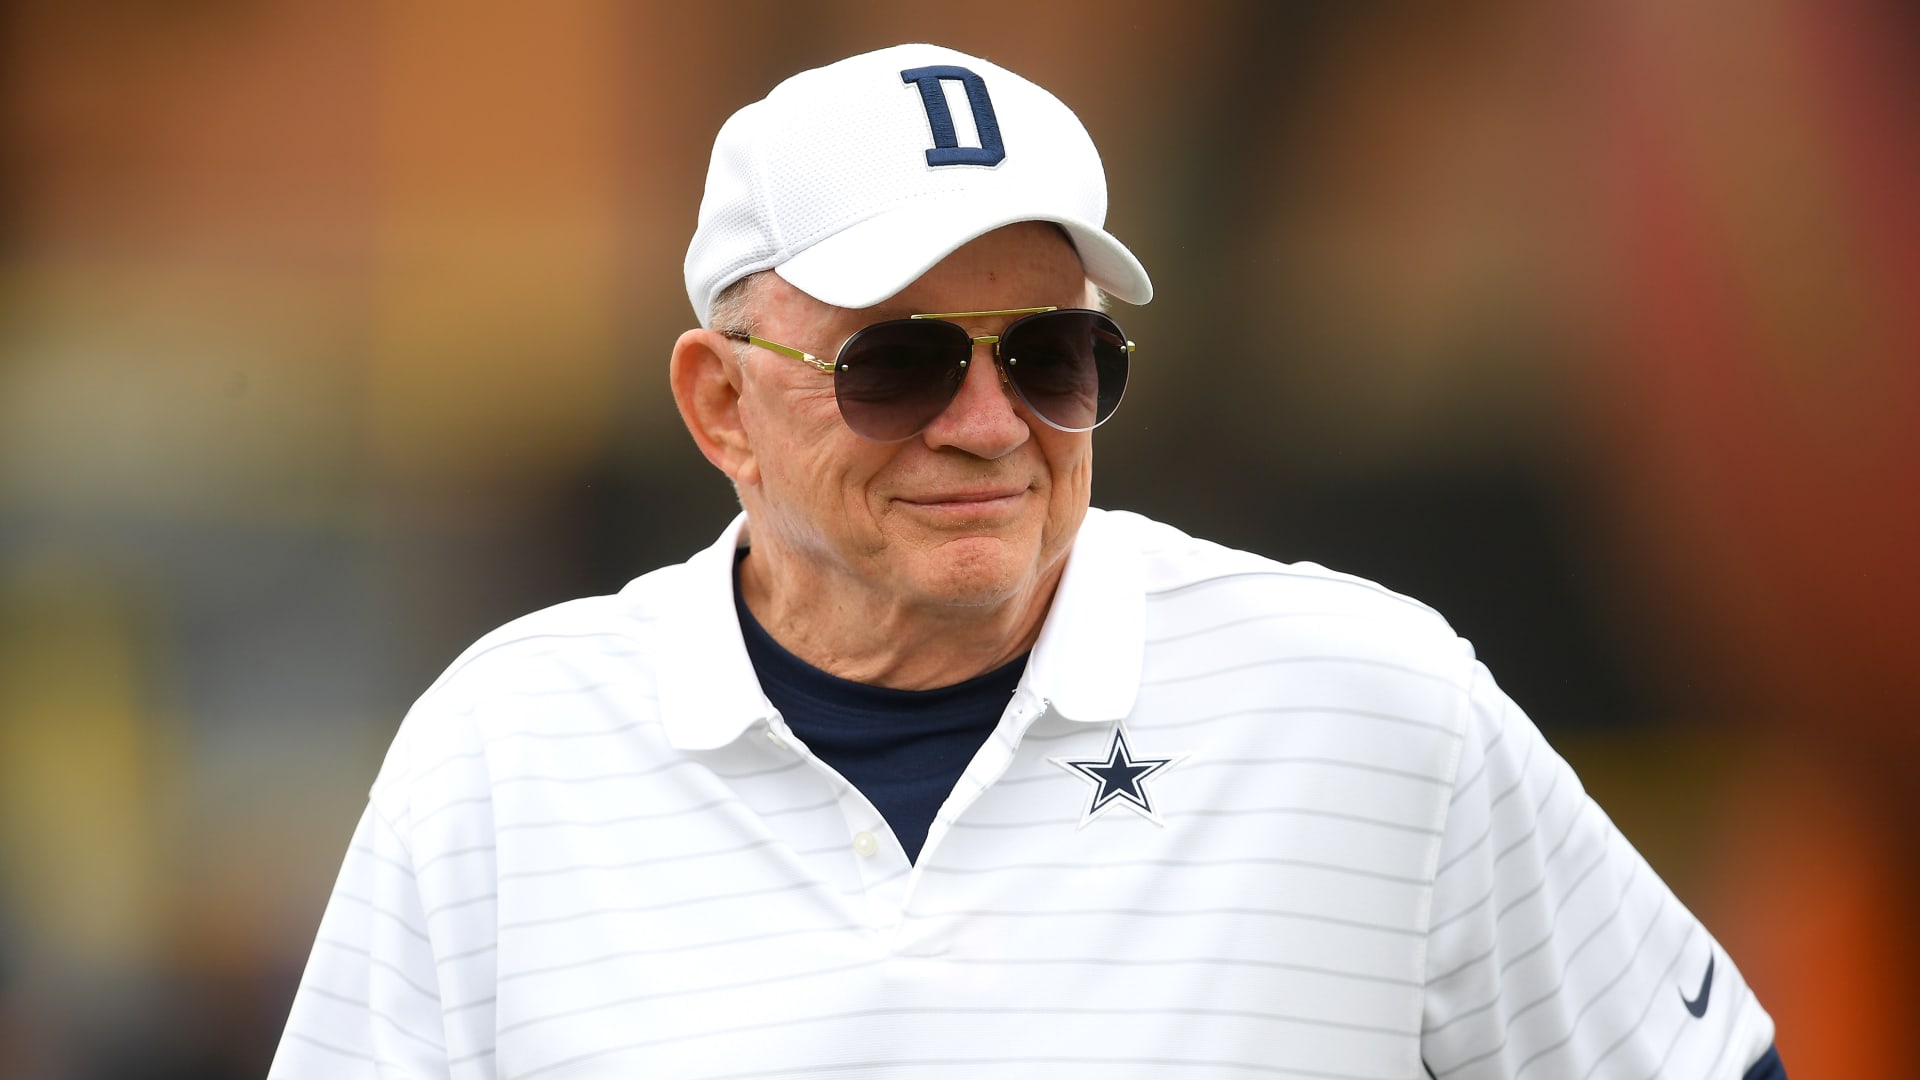 Dallas Cowboys criticized for partnership with gun-themed coffee company